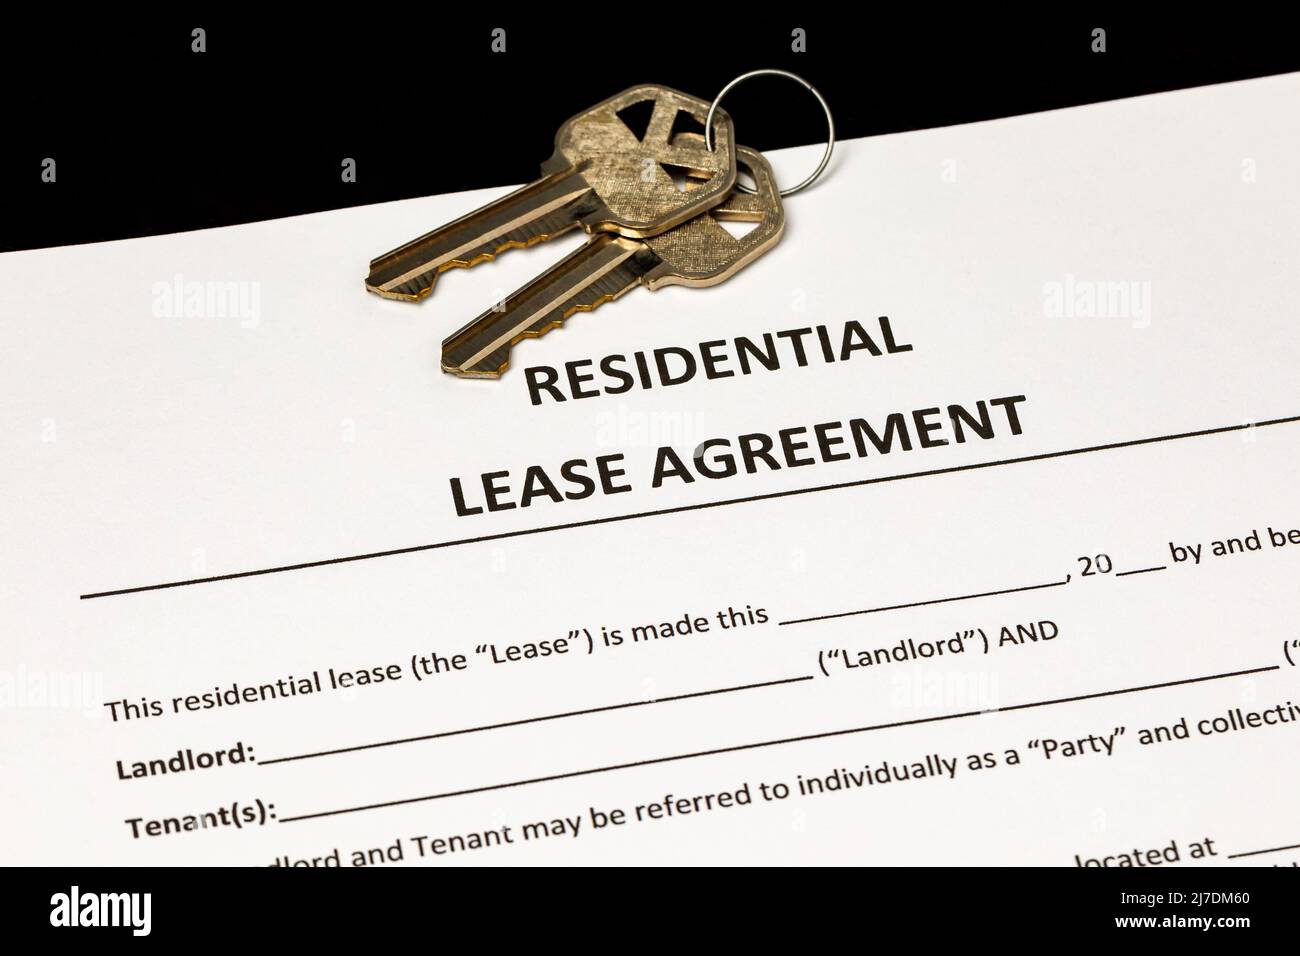 Residential lease agreement contract and keys. Home ownership, rental, and housing market concept. Stock Photo